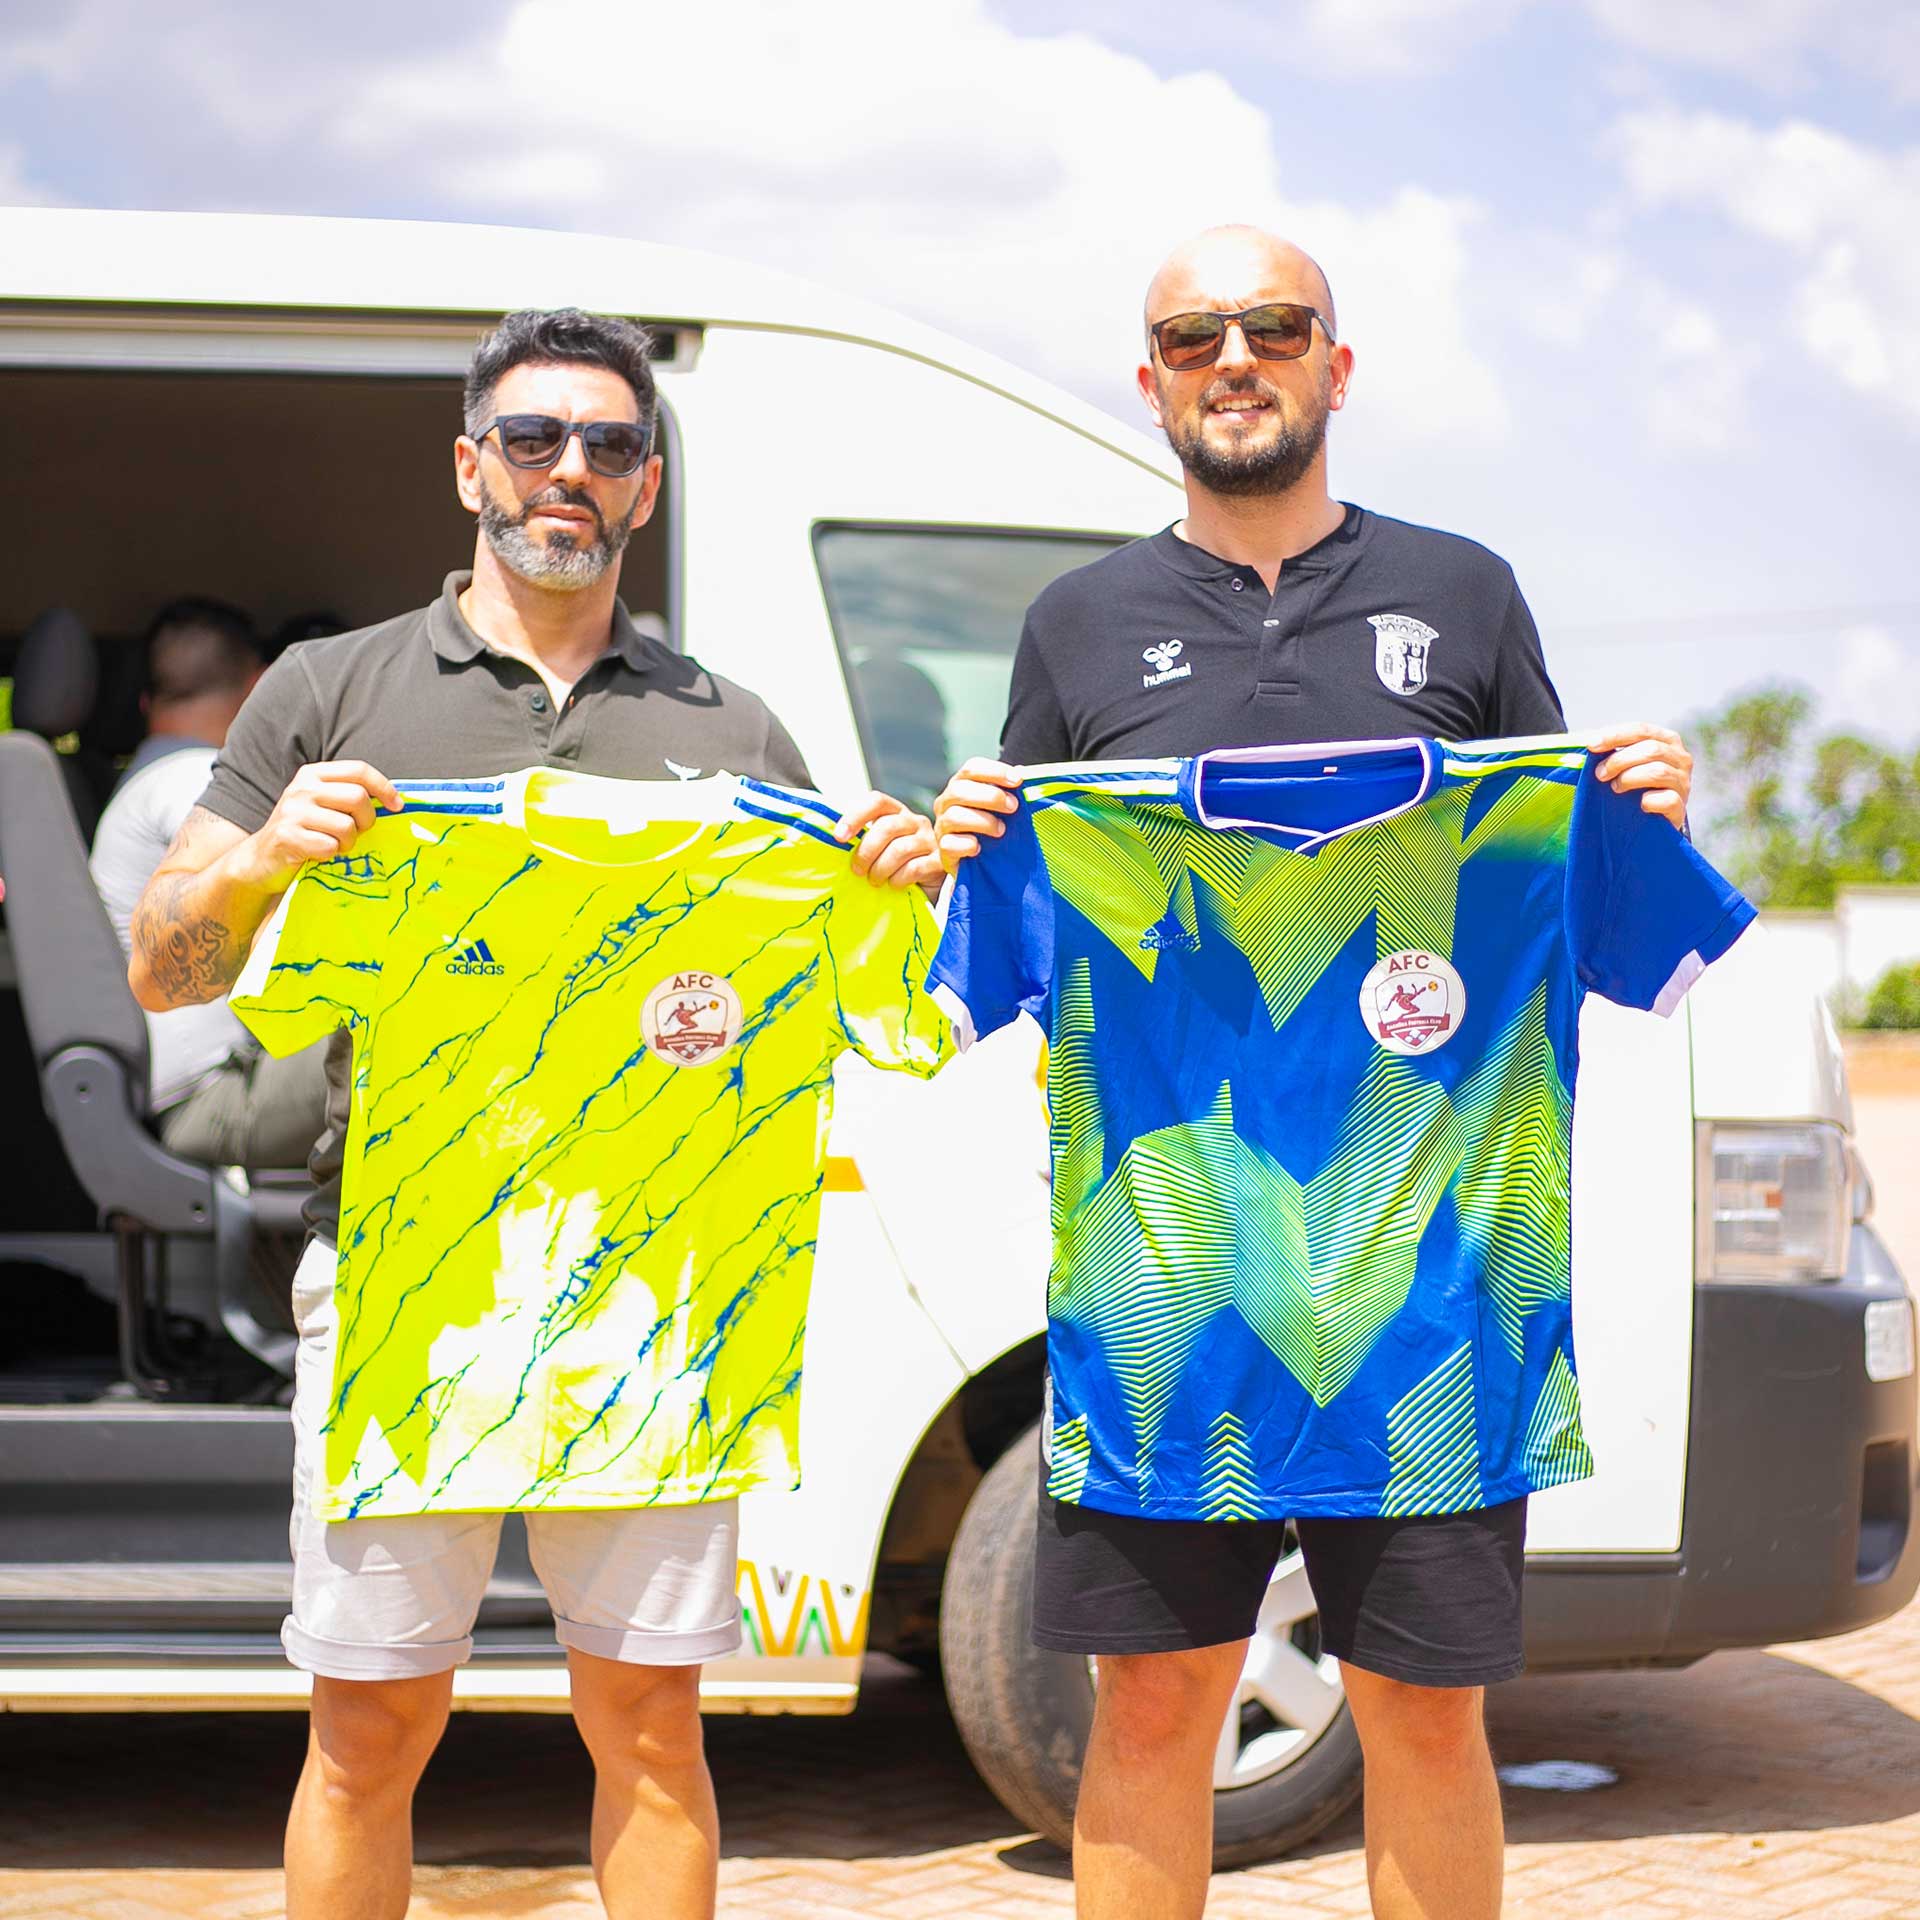 Agents in a pose with AsanSka FC Jersey